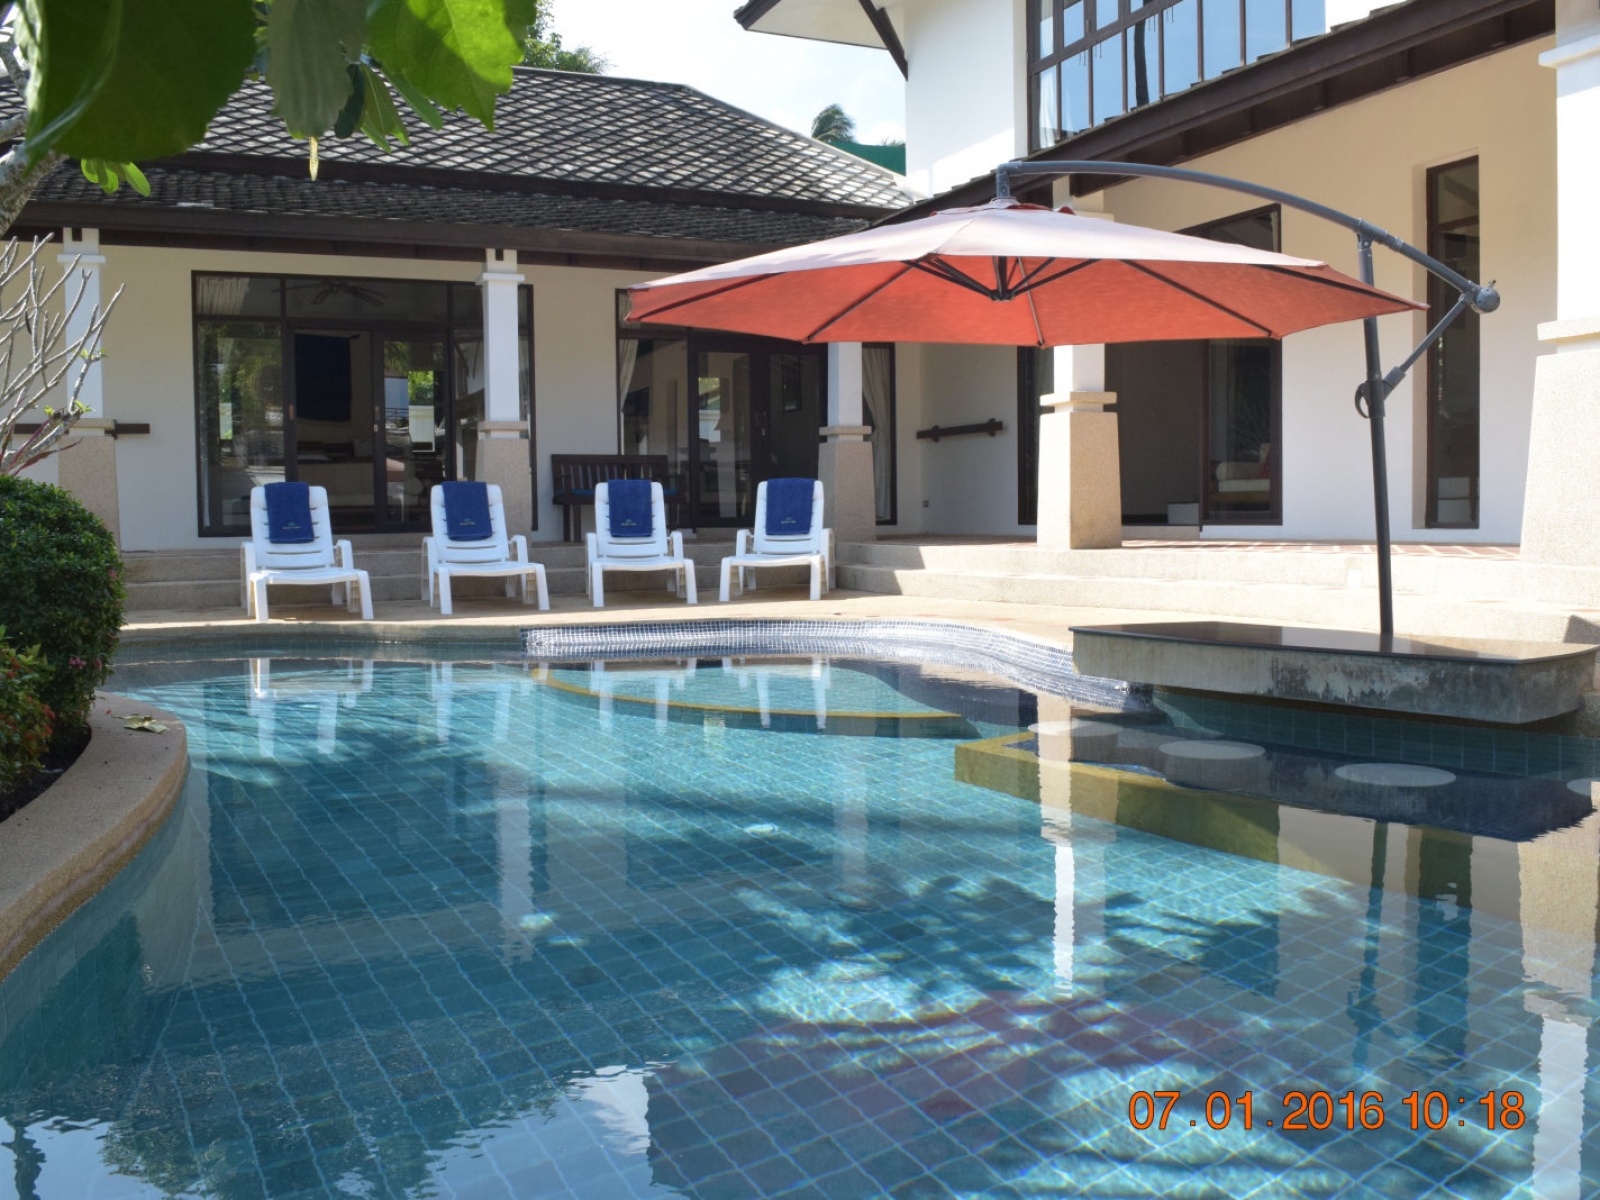 P11 Coconut Paradise Balinese Style 3 Bedroom Villa with Private Pool within a walled garden